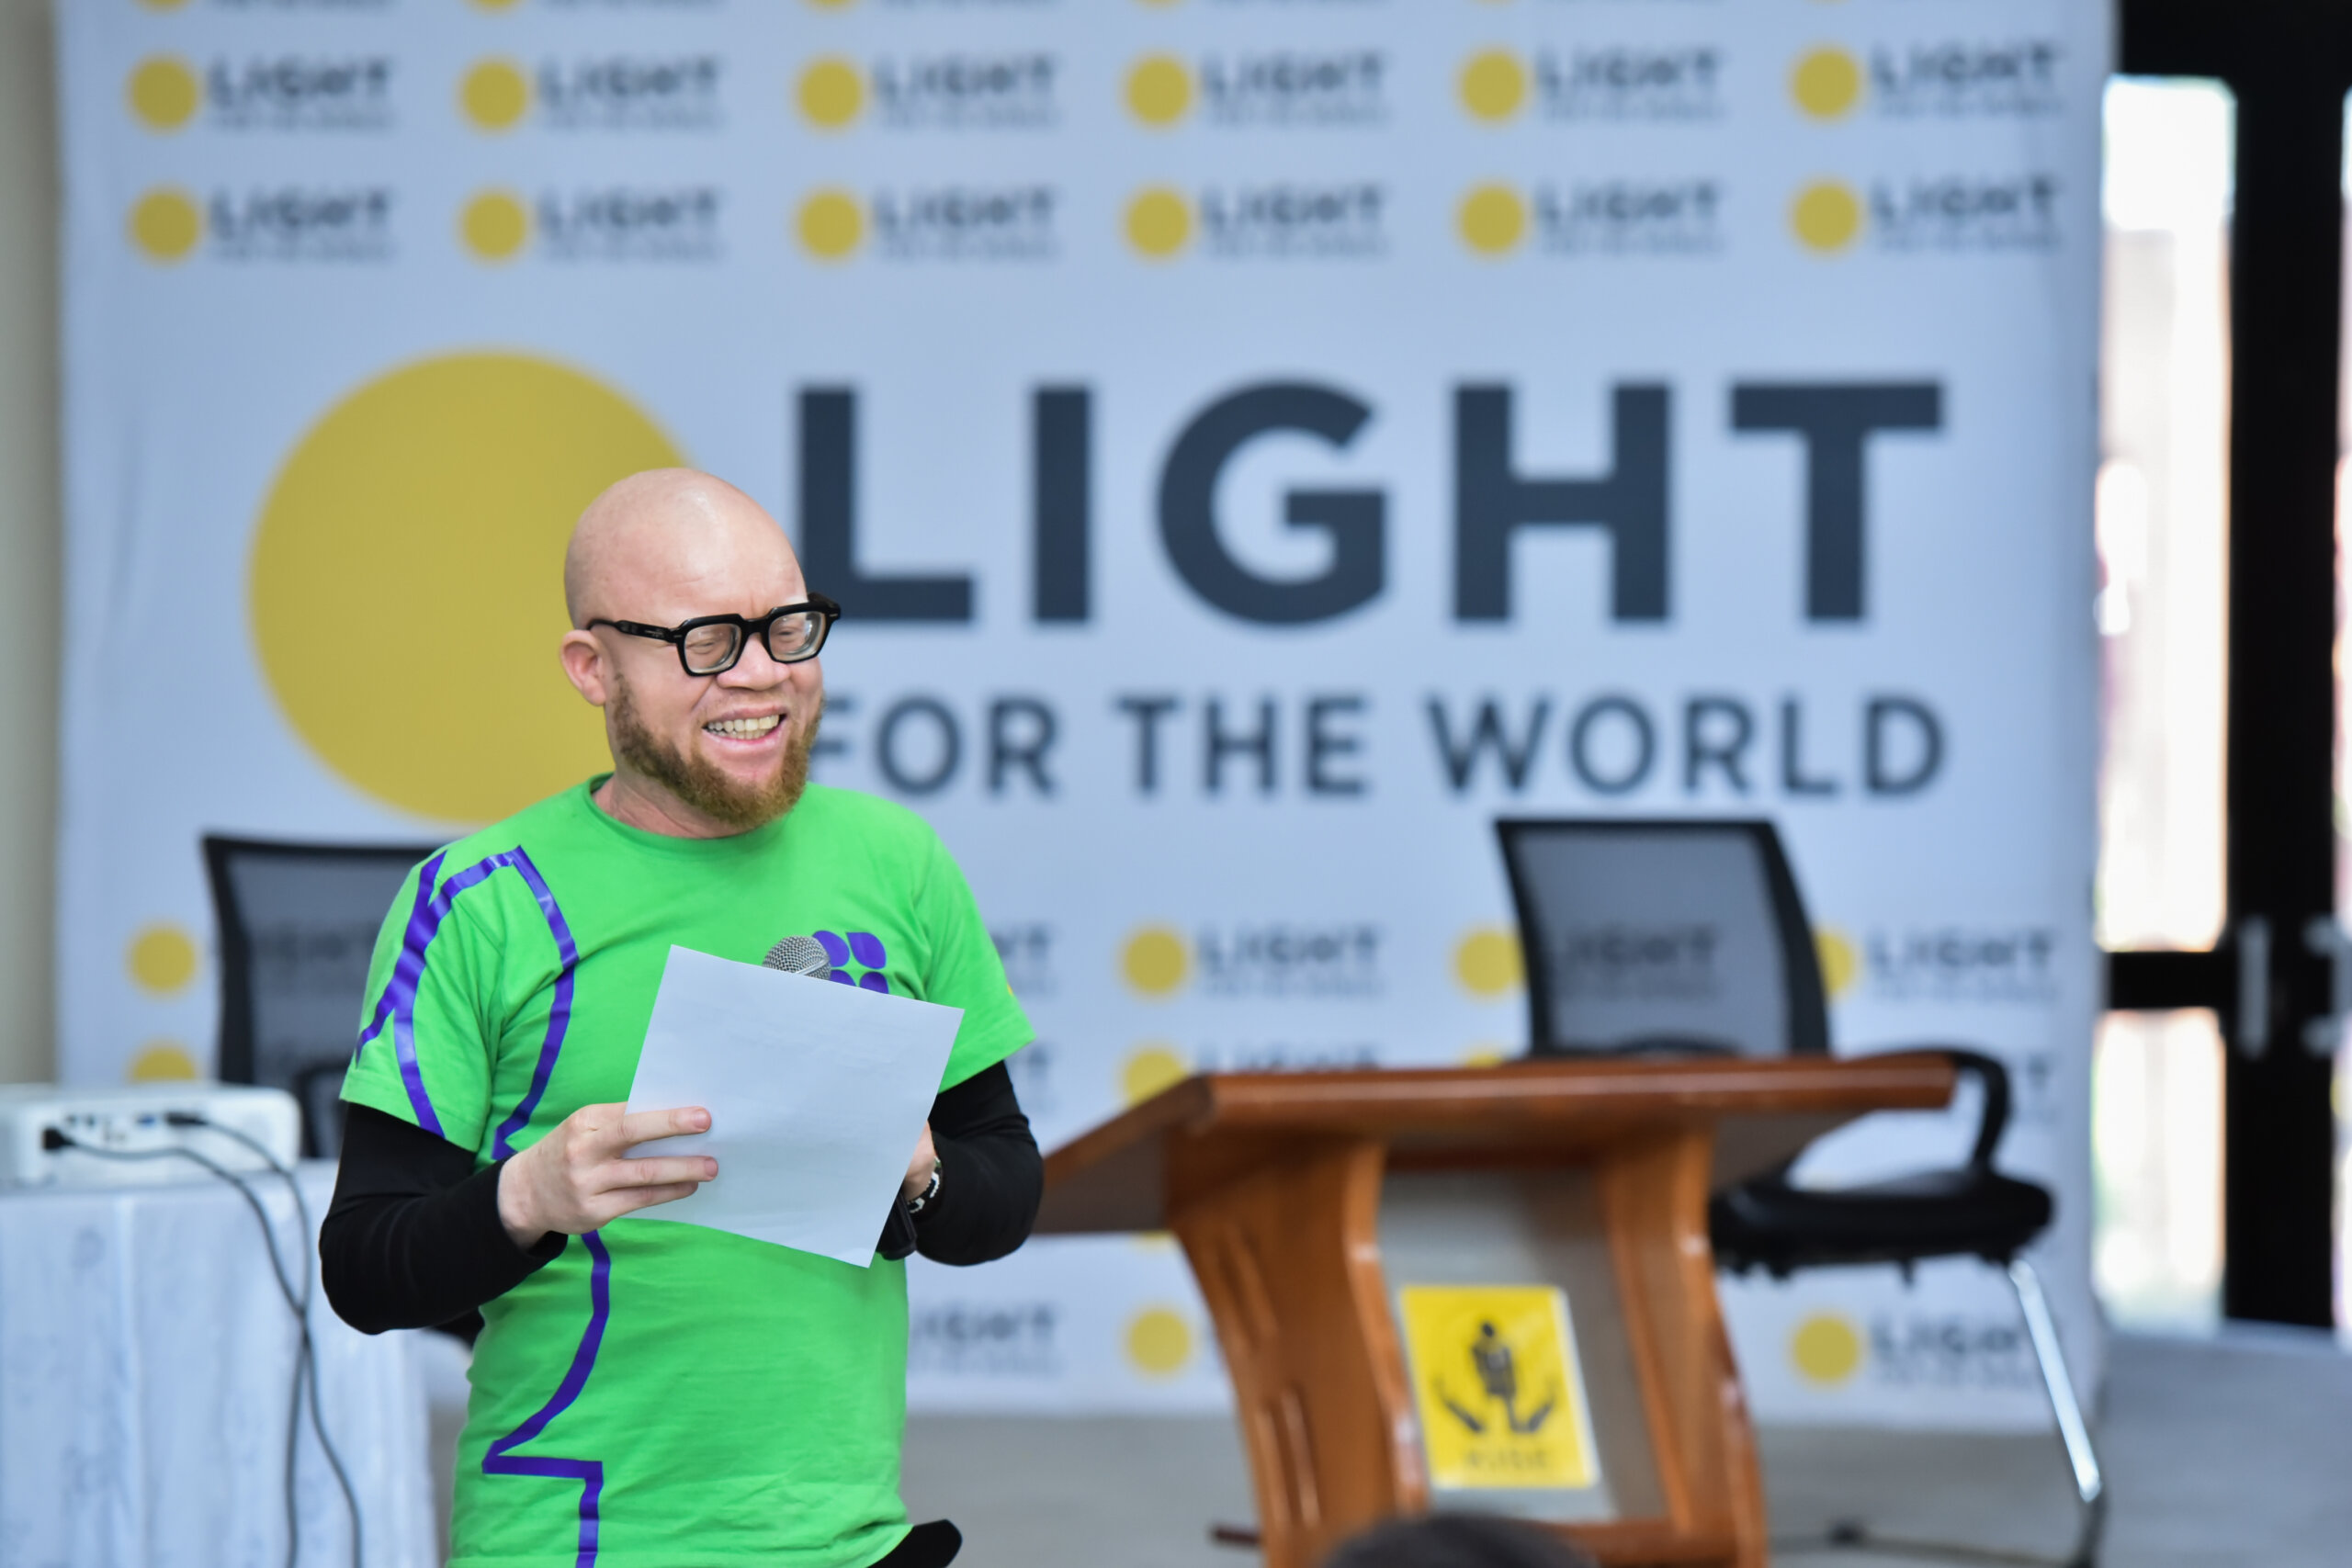 Disability rights activist, Collins Ombajo stands on stage, wearing a green top and holding a piece of paper. He is standing in front of a Light for the World sign and breaking barriers to economic independence for people with disabilities.